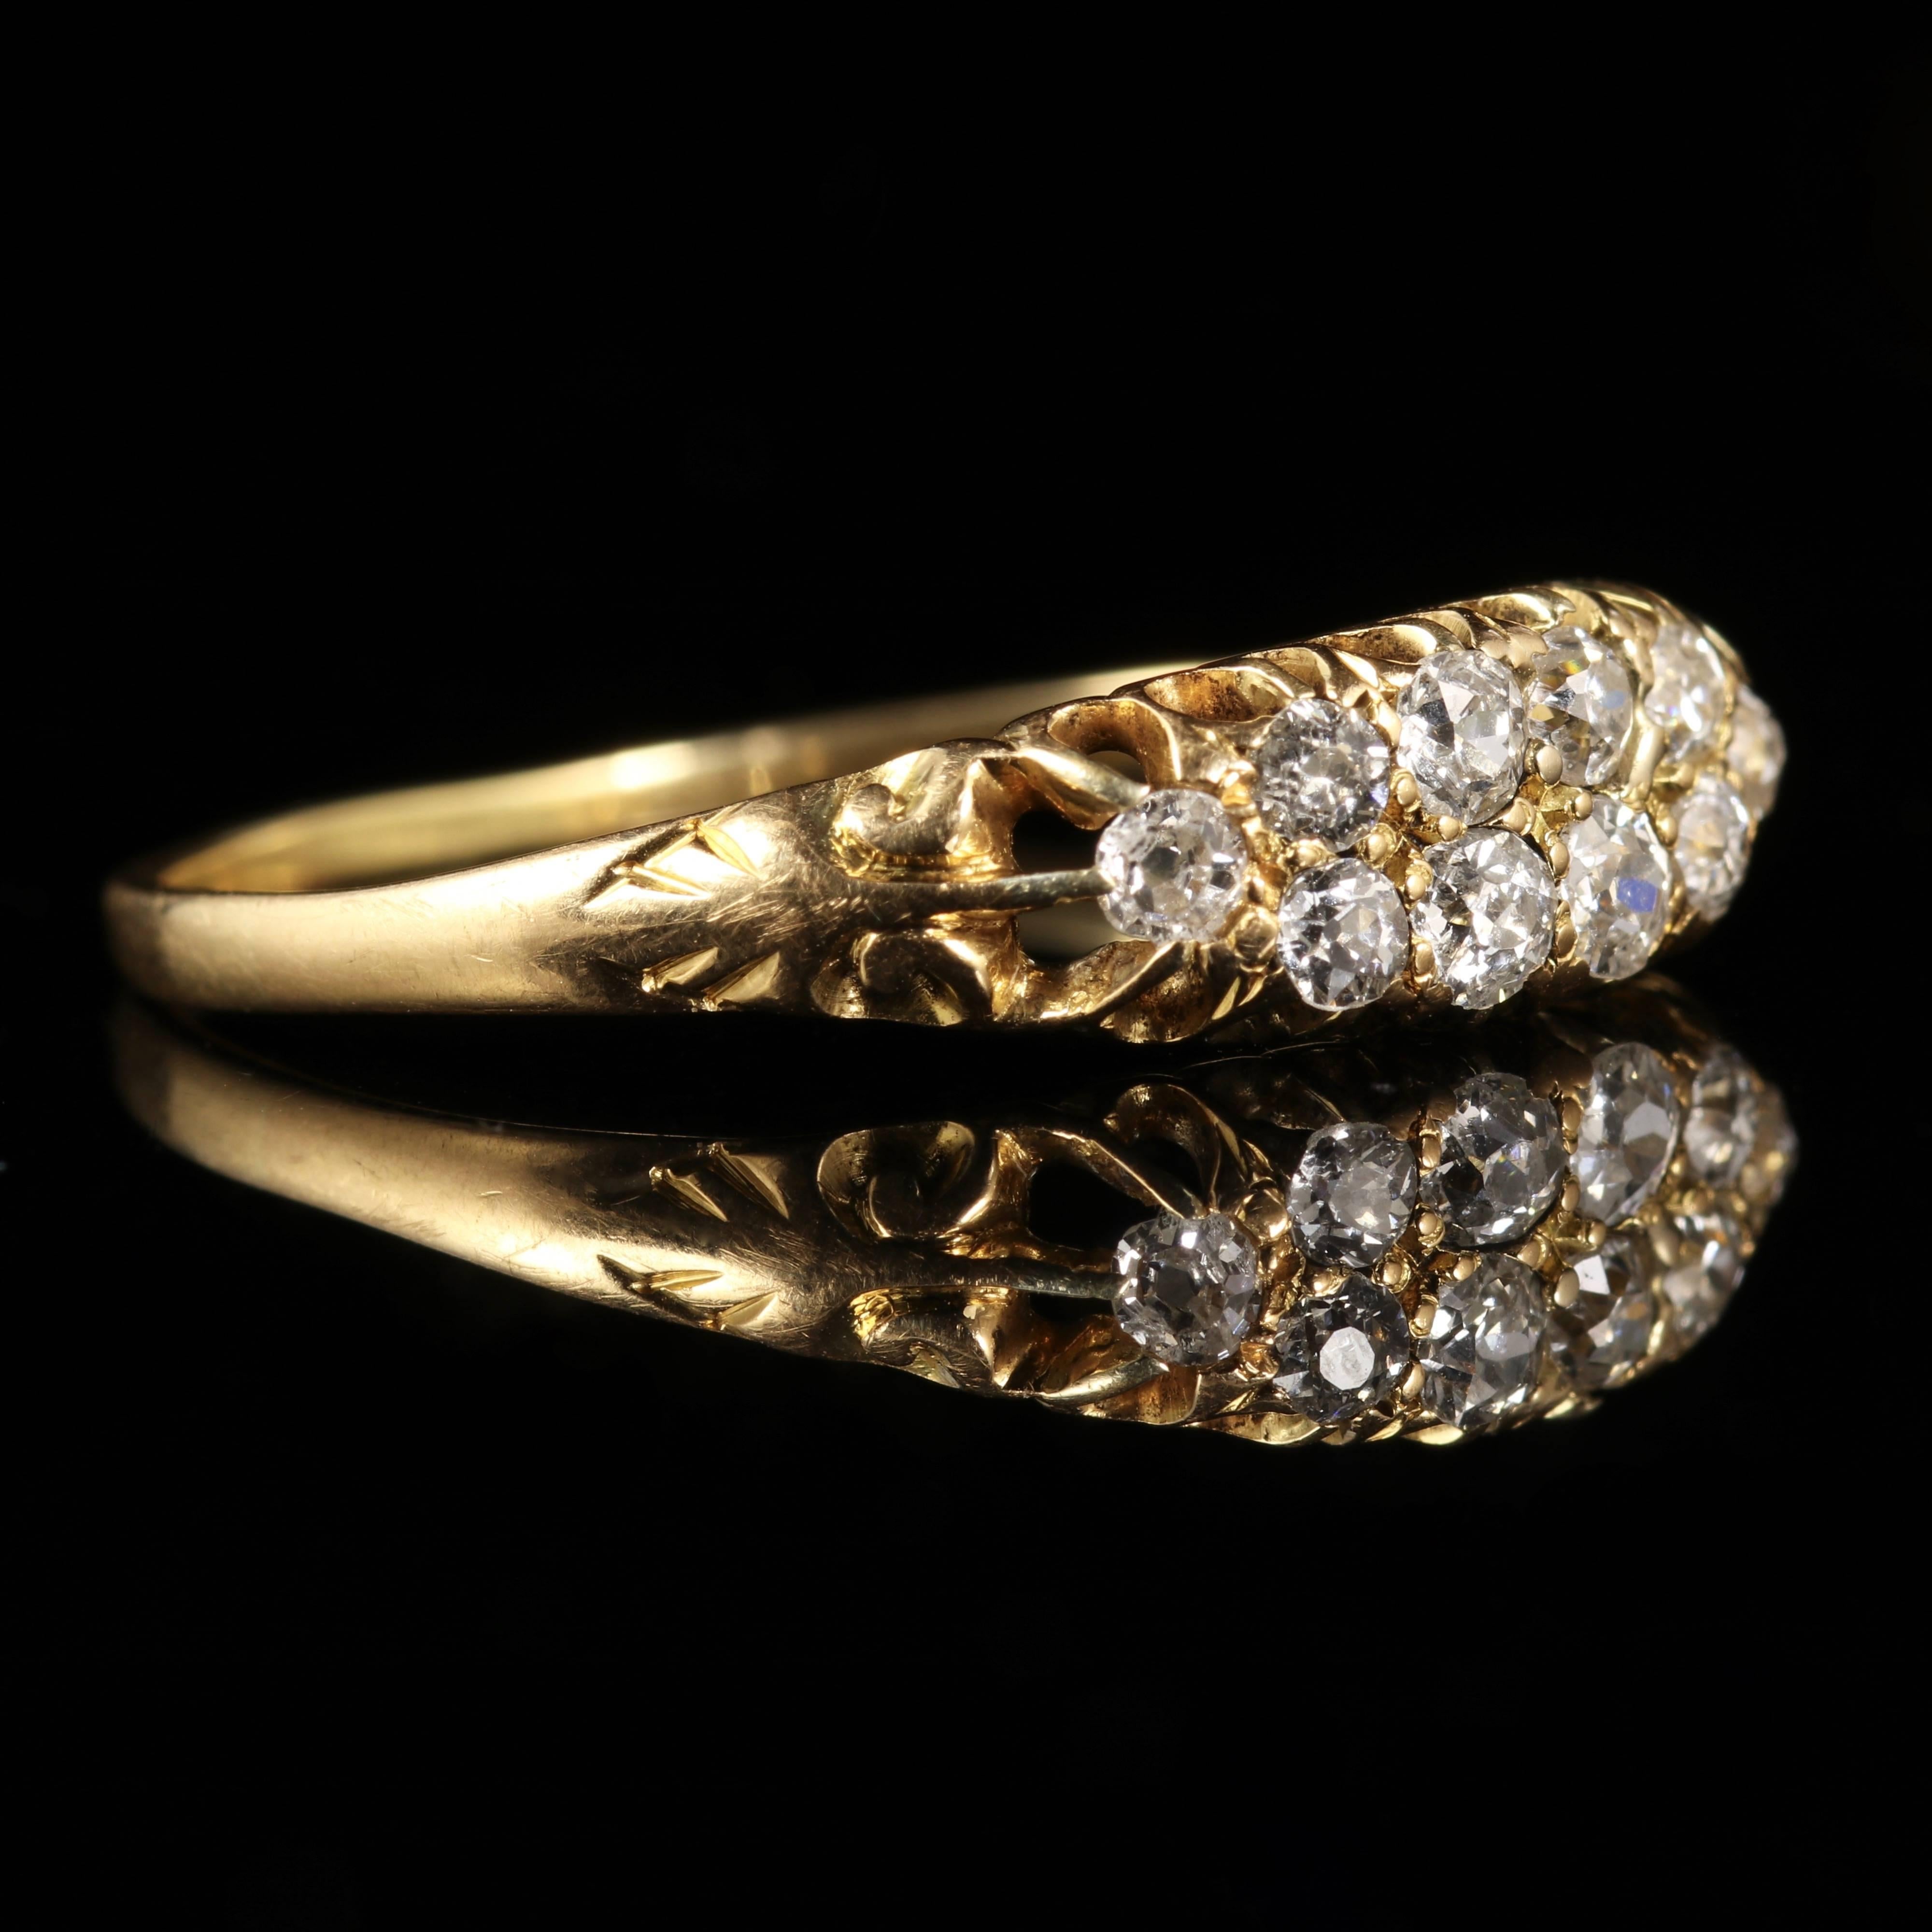 This fabulous Victorian 18ct Yellow Gold Diamond ring is set with 0.70ct of Diamonds.

The Diamonds have superb clarity and are SI 1 H colour.

Diamond is the hardest mineral on Earth and this combined with its exceptional lustre and brilliant fire